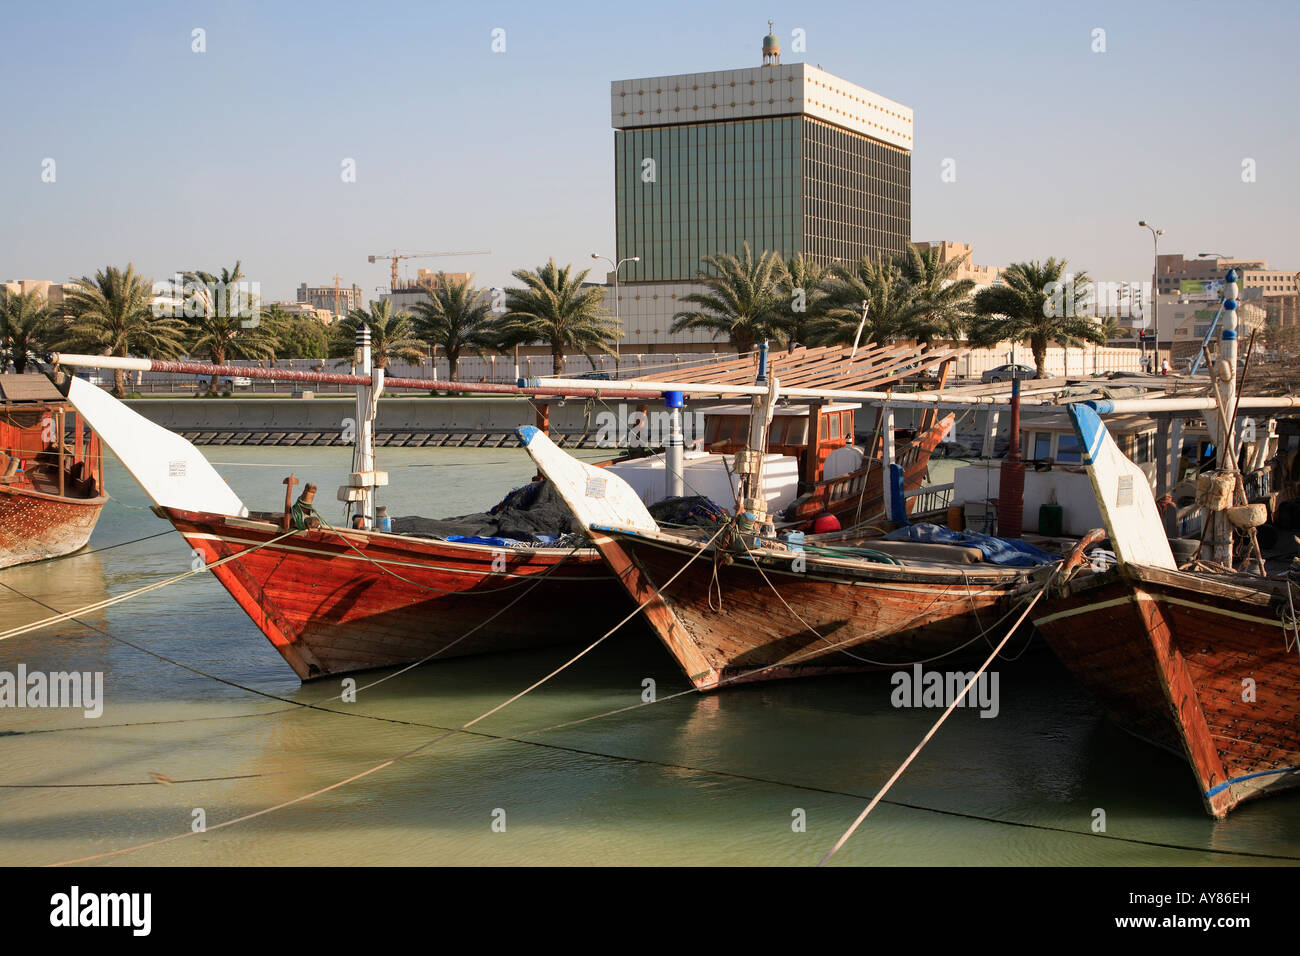 Katar Doha Dhow Hafen traditionelle Boote Zentralbank Stockfoto